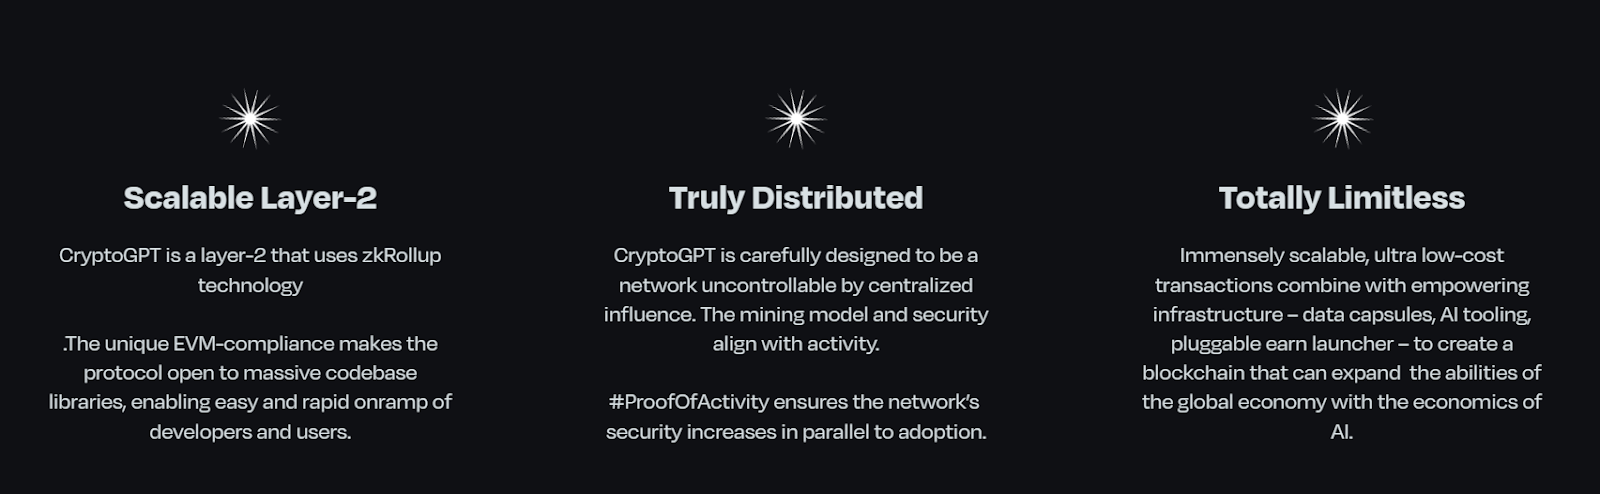 Features of CryptoGPT, Source: CryptoGPT